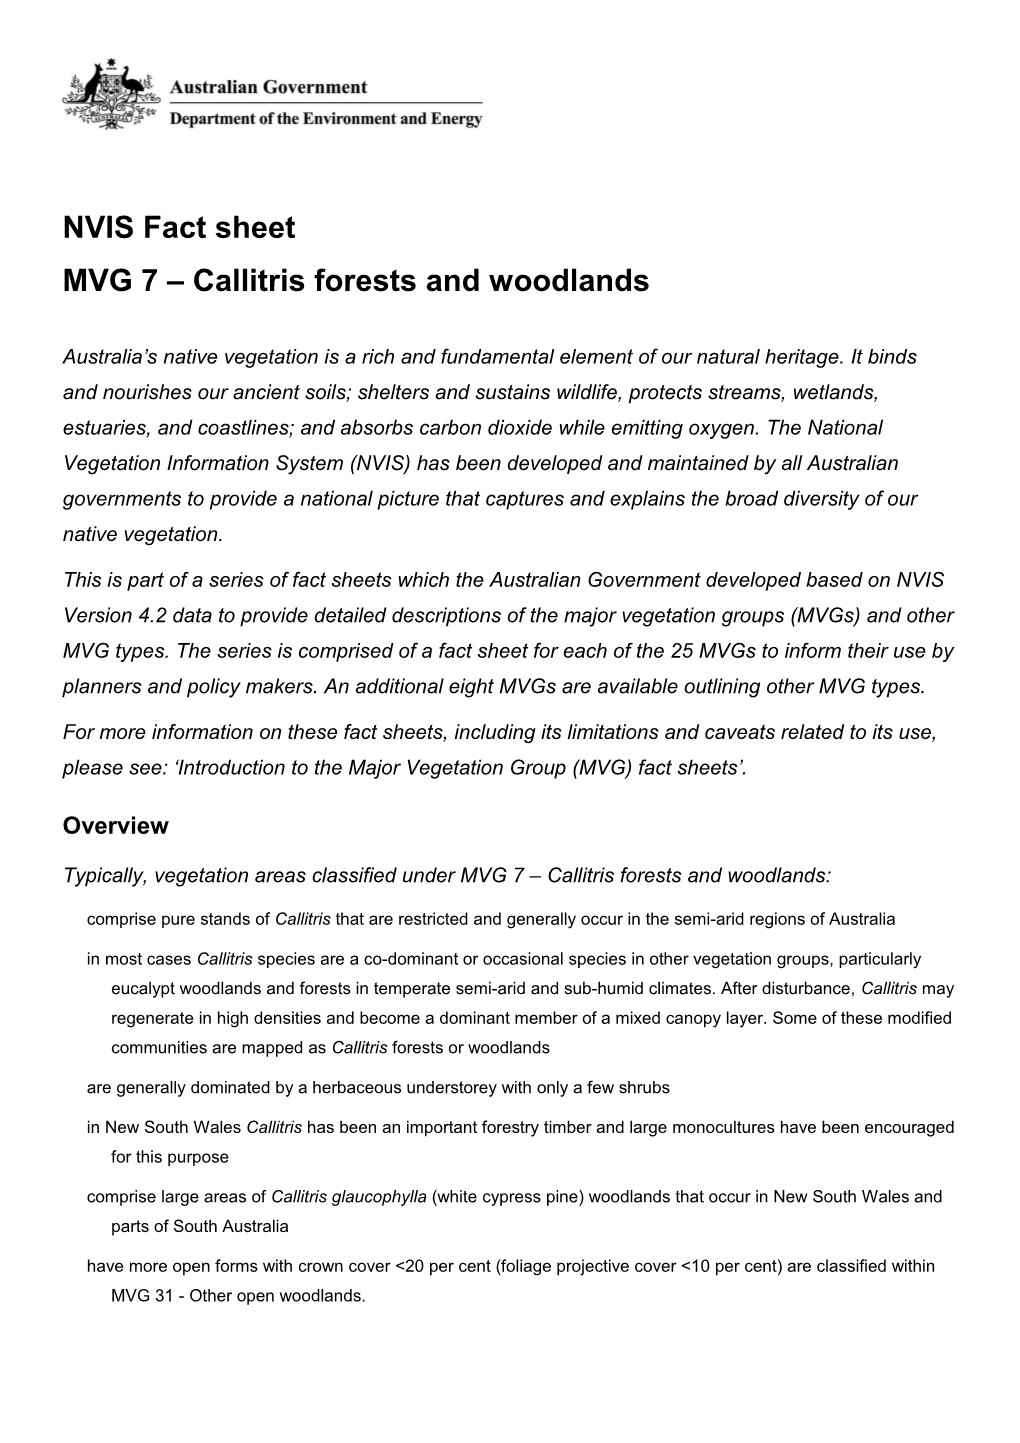 NVIS Fact Sheet MVG 7 Callitris Forests and Woodlands